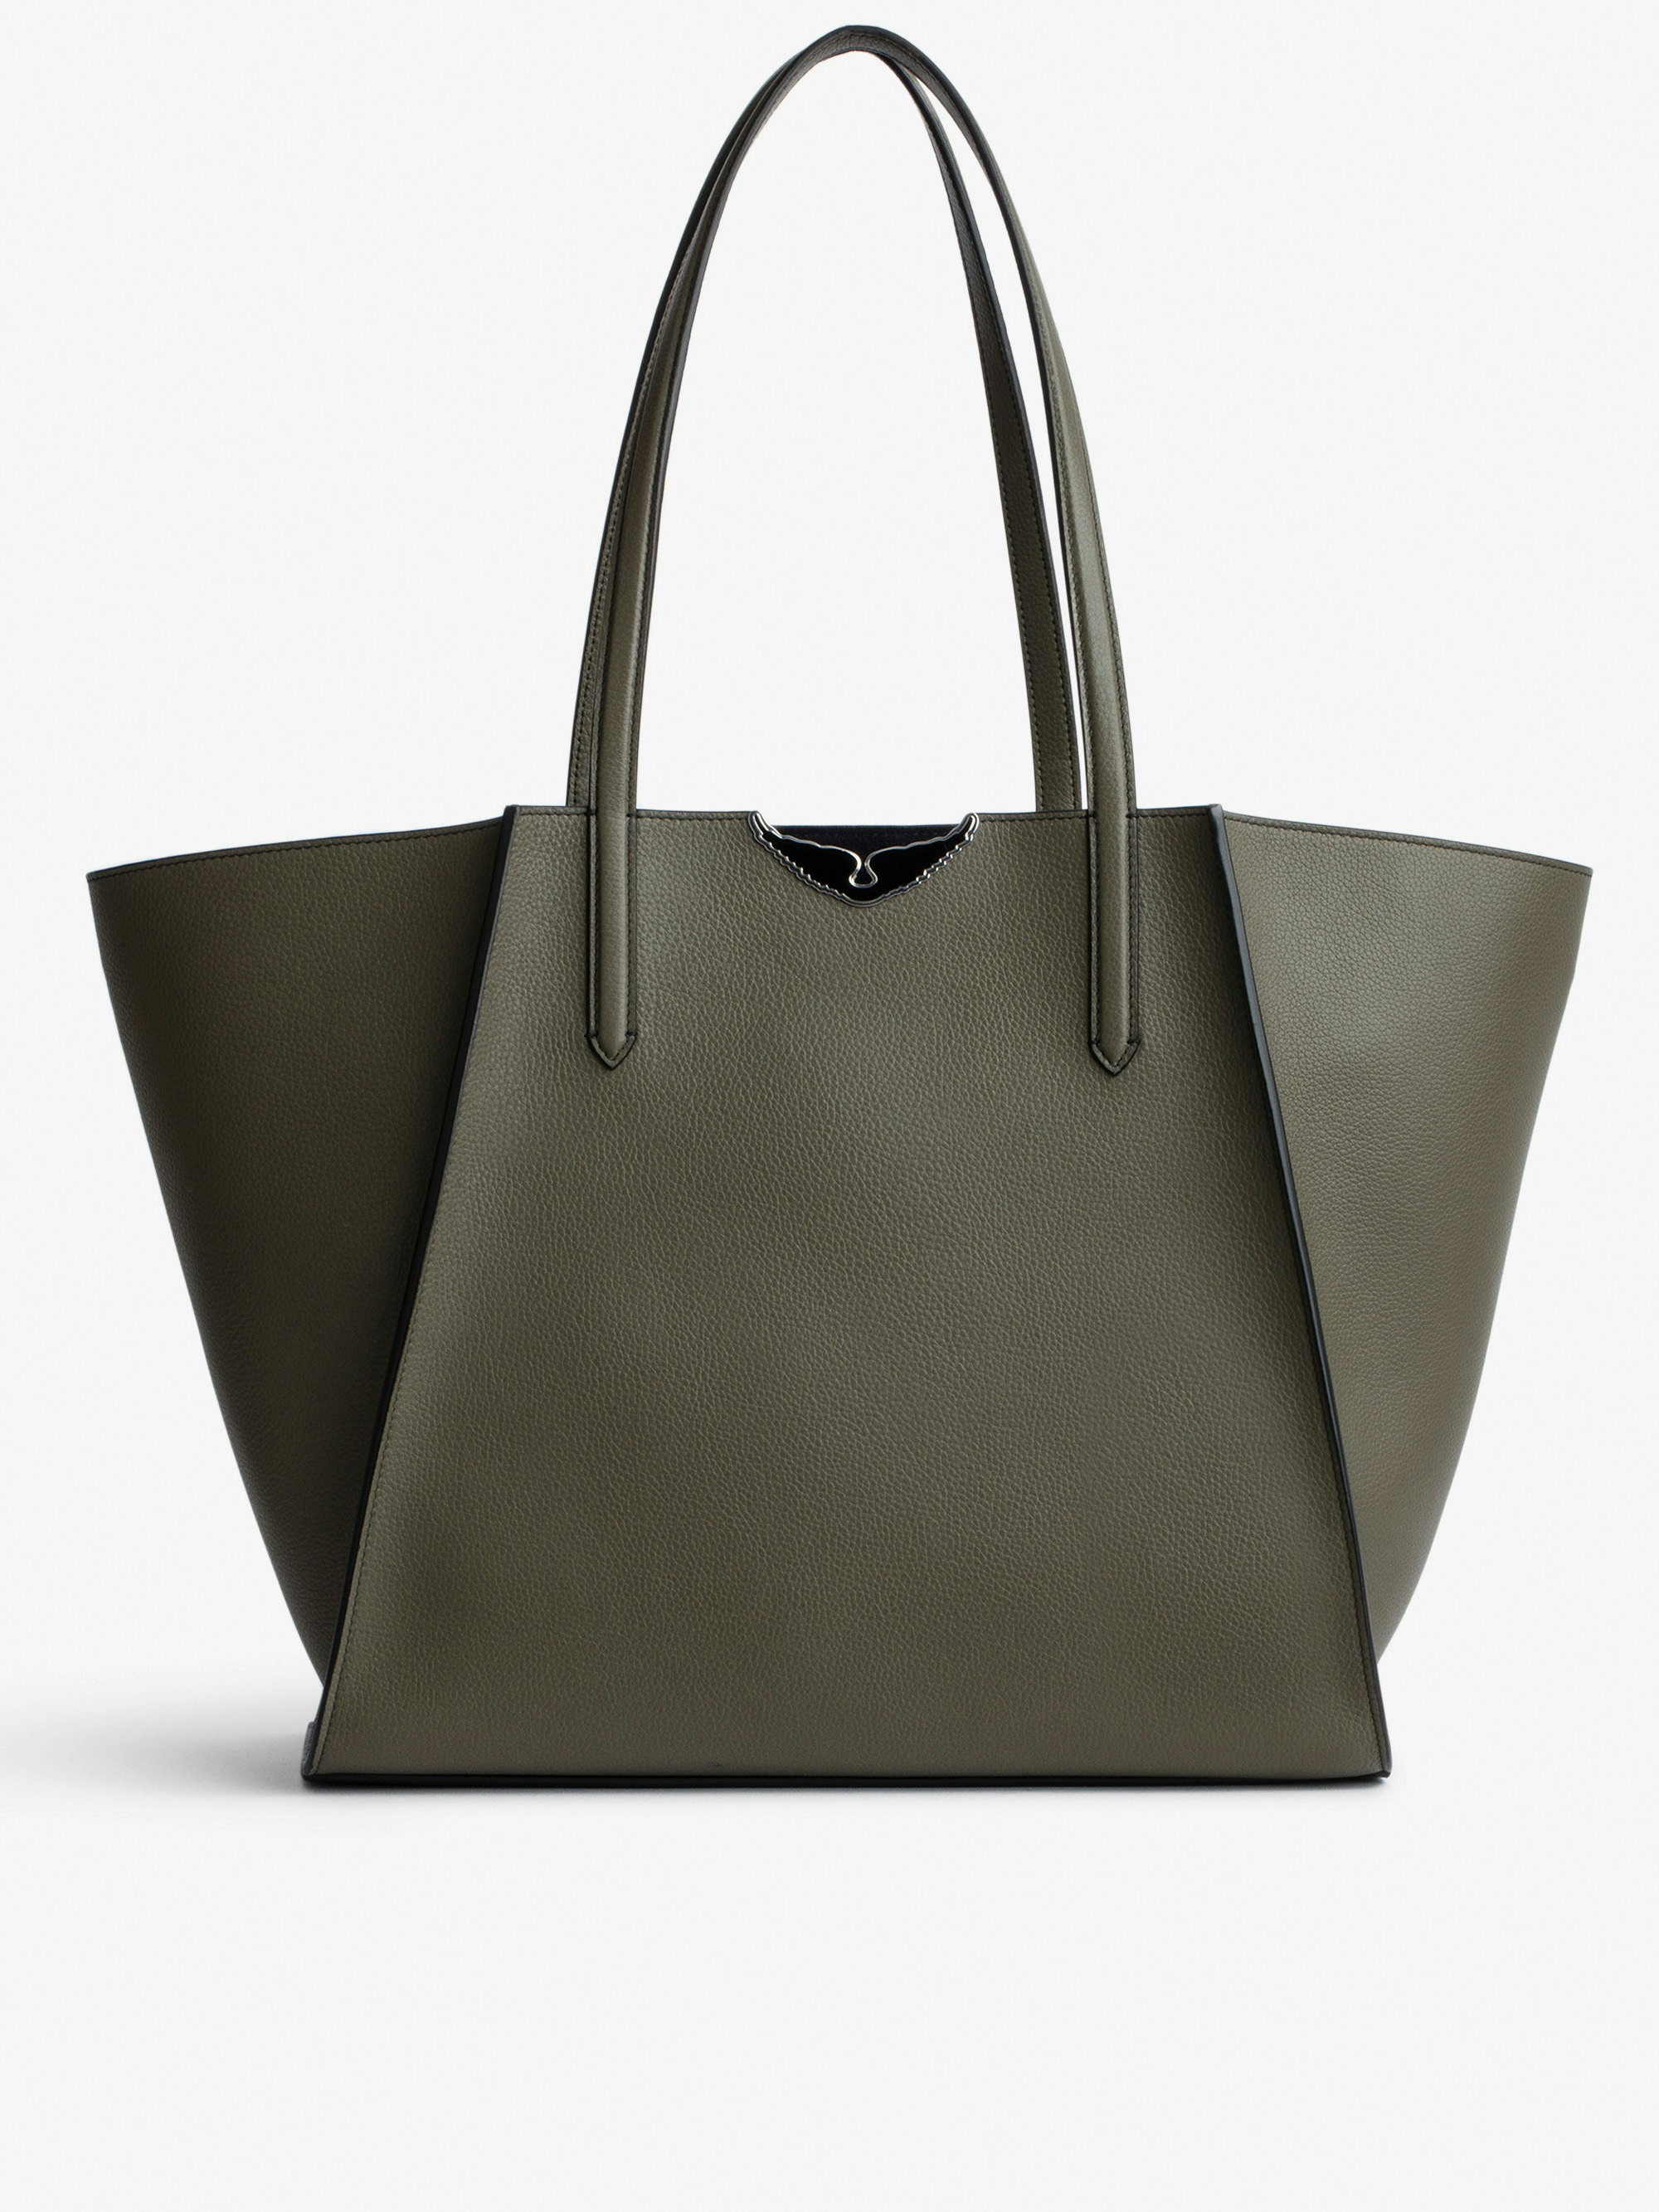 Le Borderline Bag - Women's reversible tote bag in khaki grained leather and navy-blue suede with black lacquered wings.